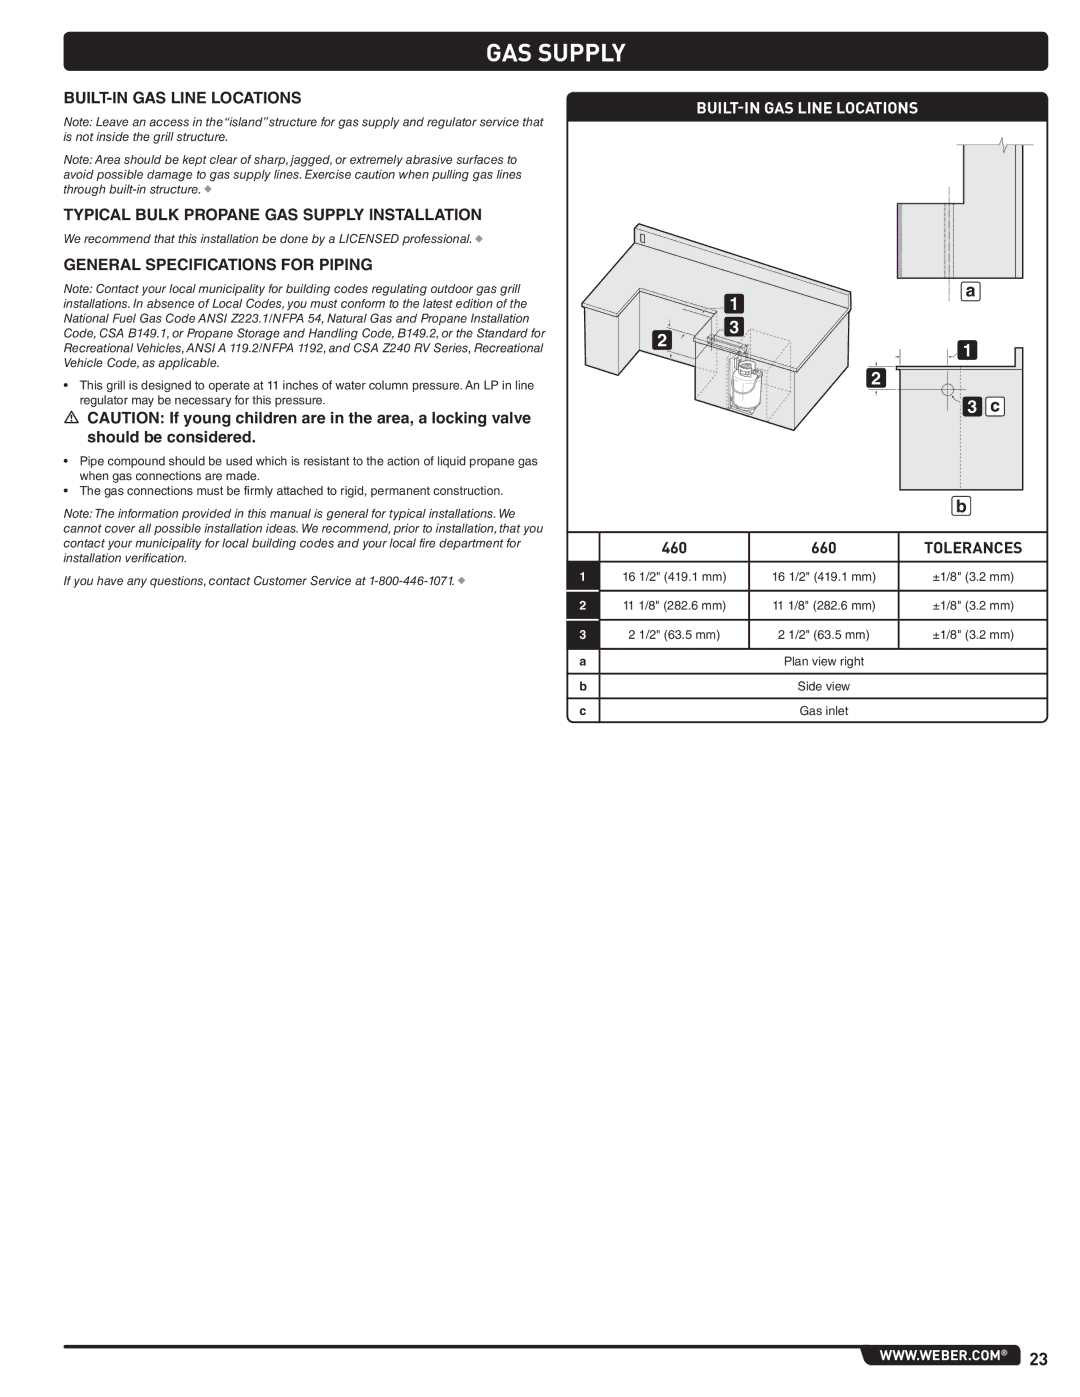 Weber 660- LP, Weber manual GAS Supply, General Specifications for Piping, BUILT-IN GAS Line Locations 